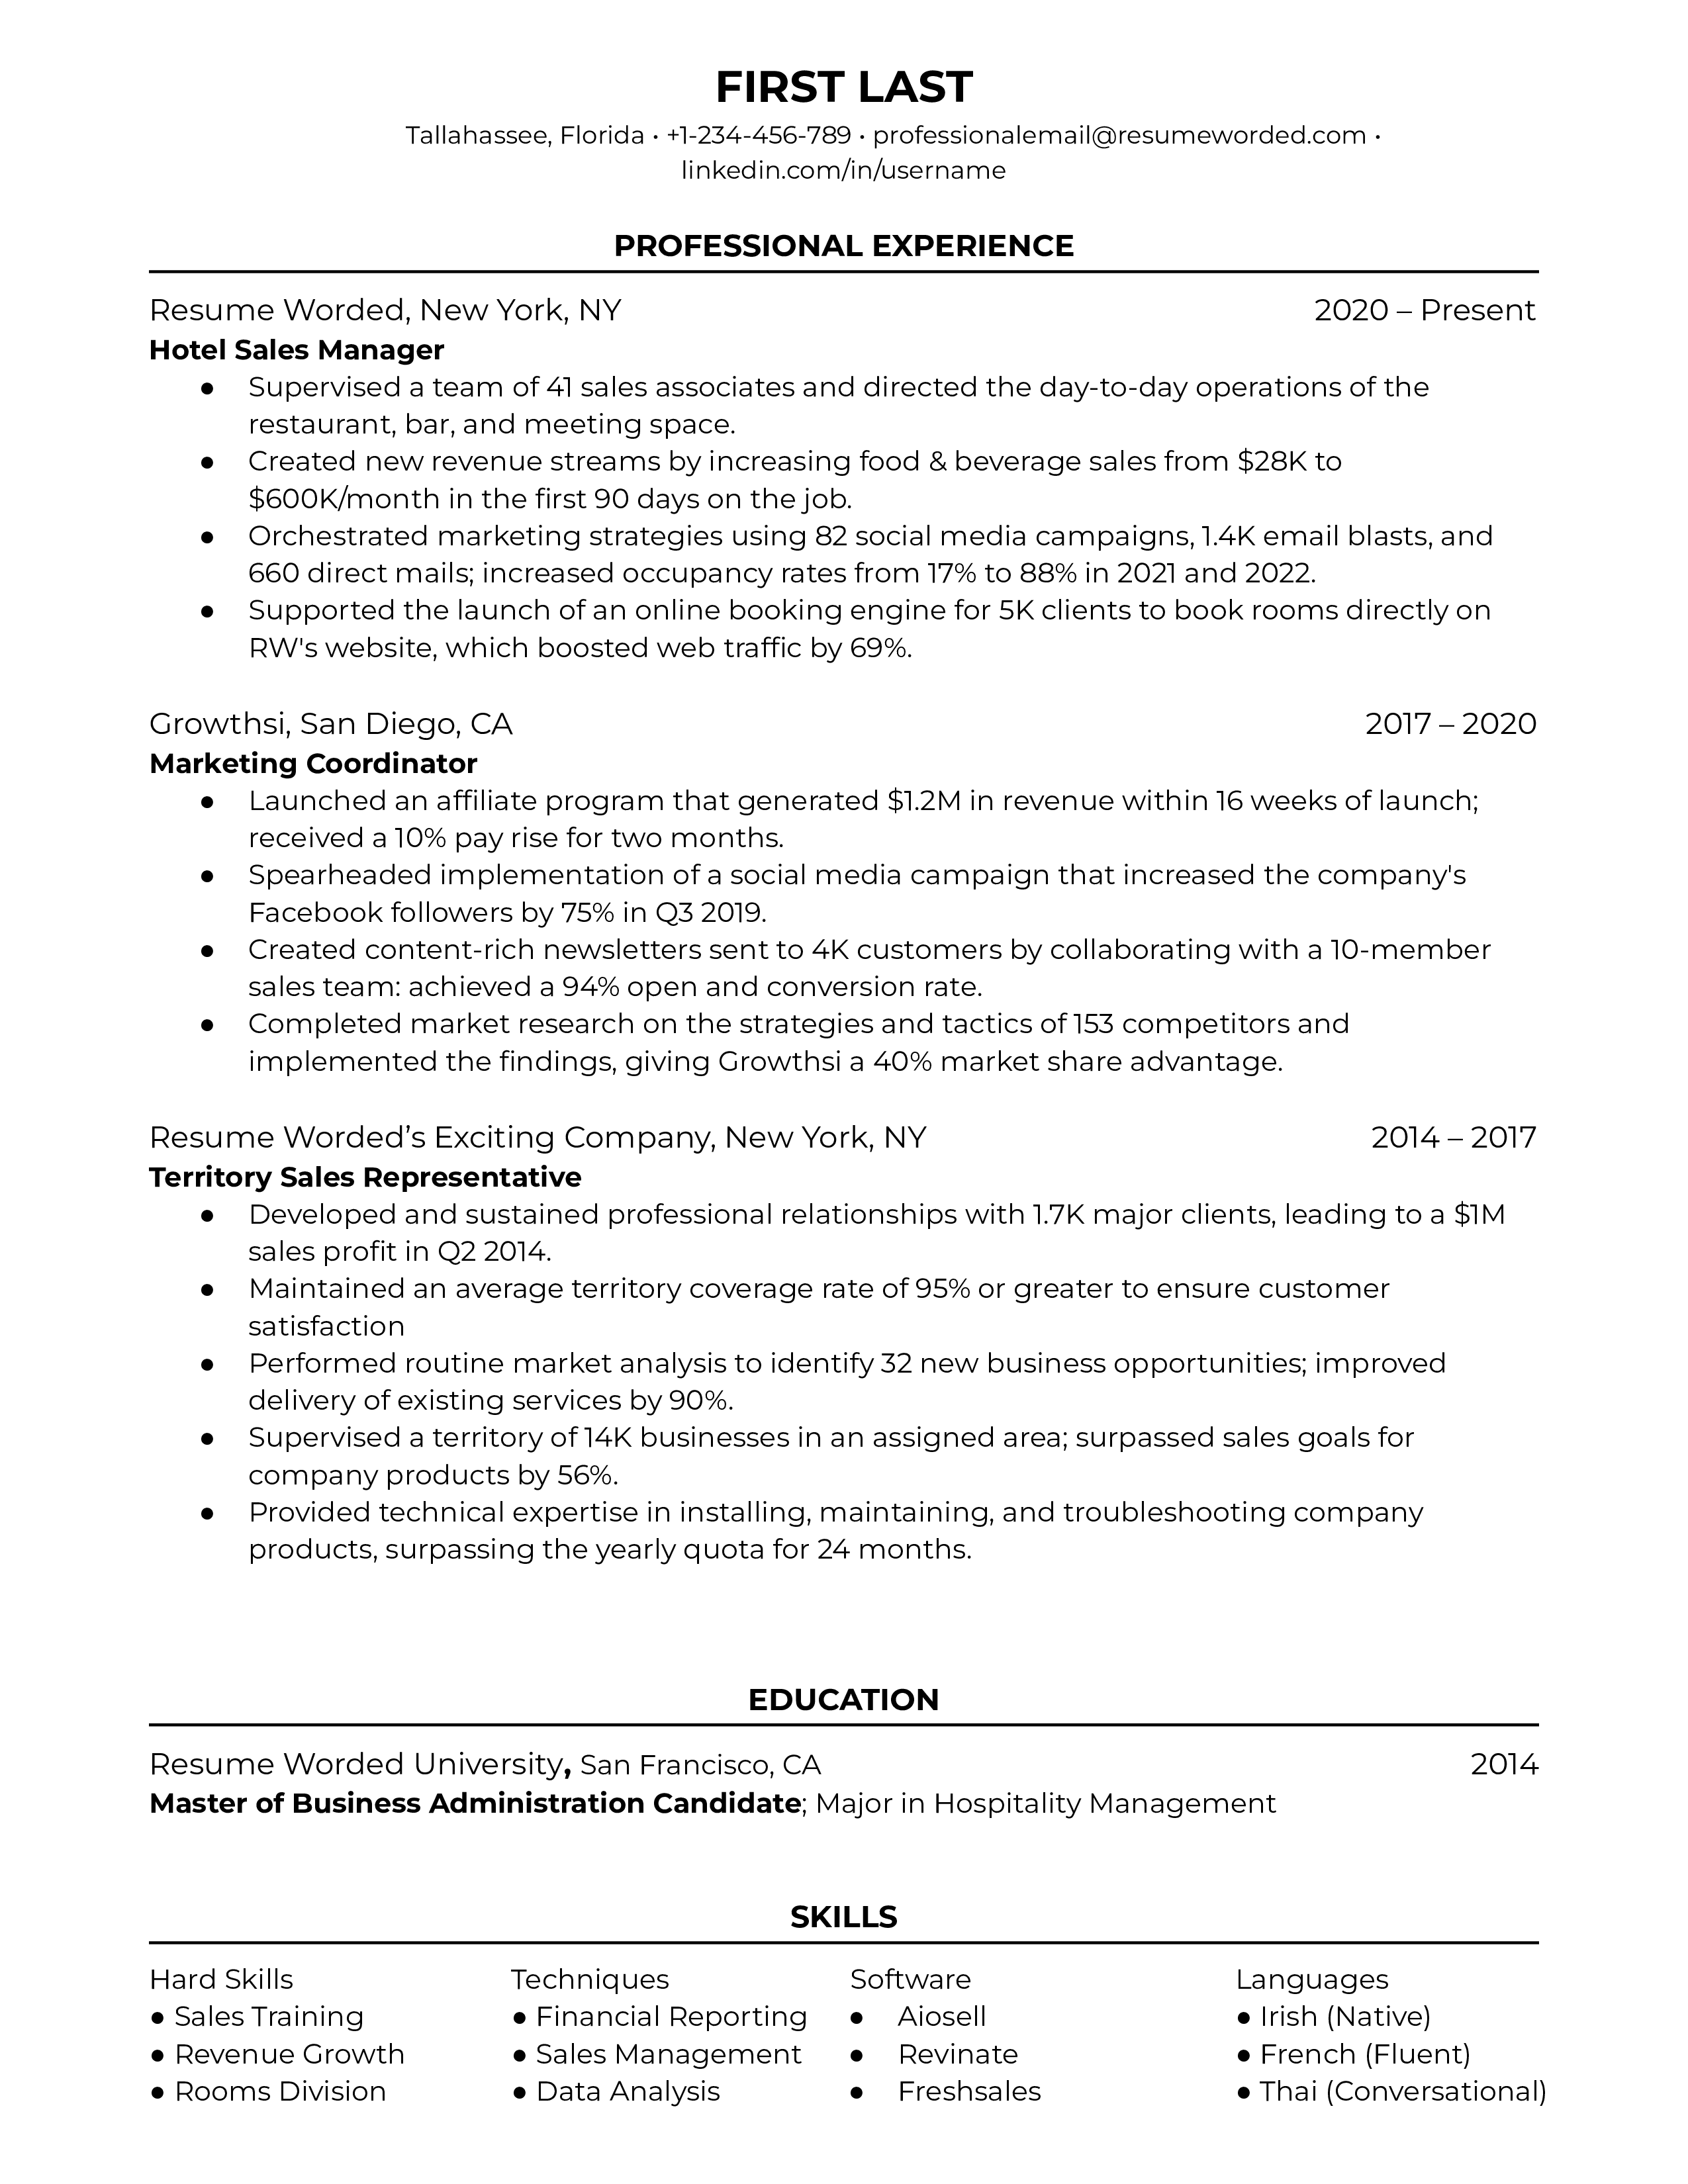 A hotel sales manager resume sample that highlights the applicant’s effect on the bottom line and marketing background.